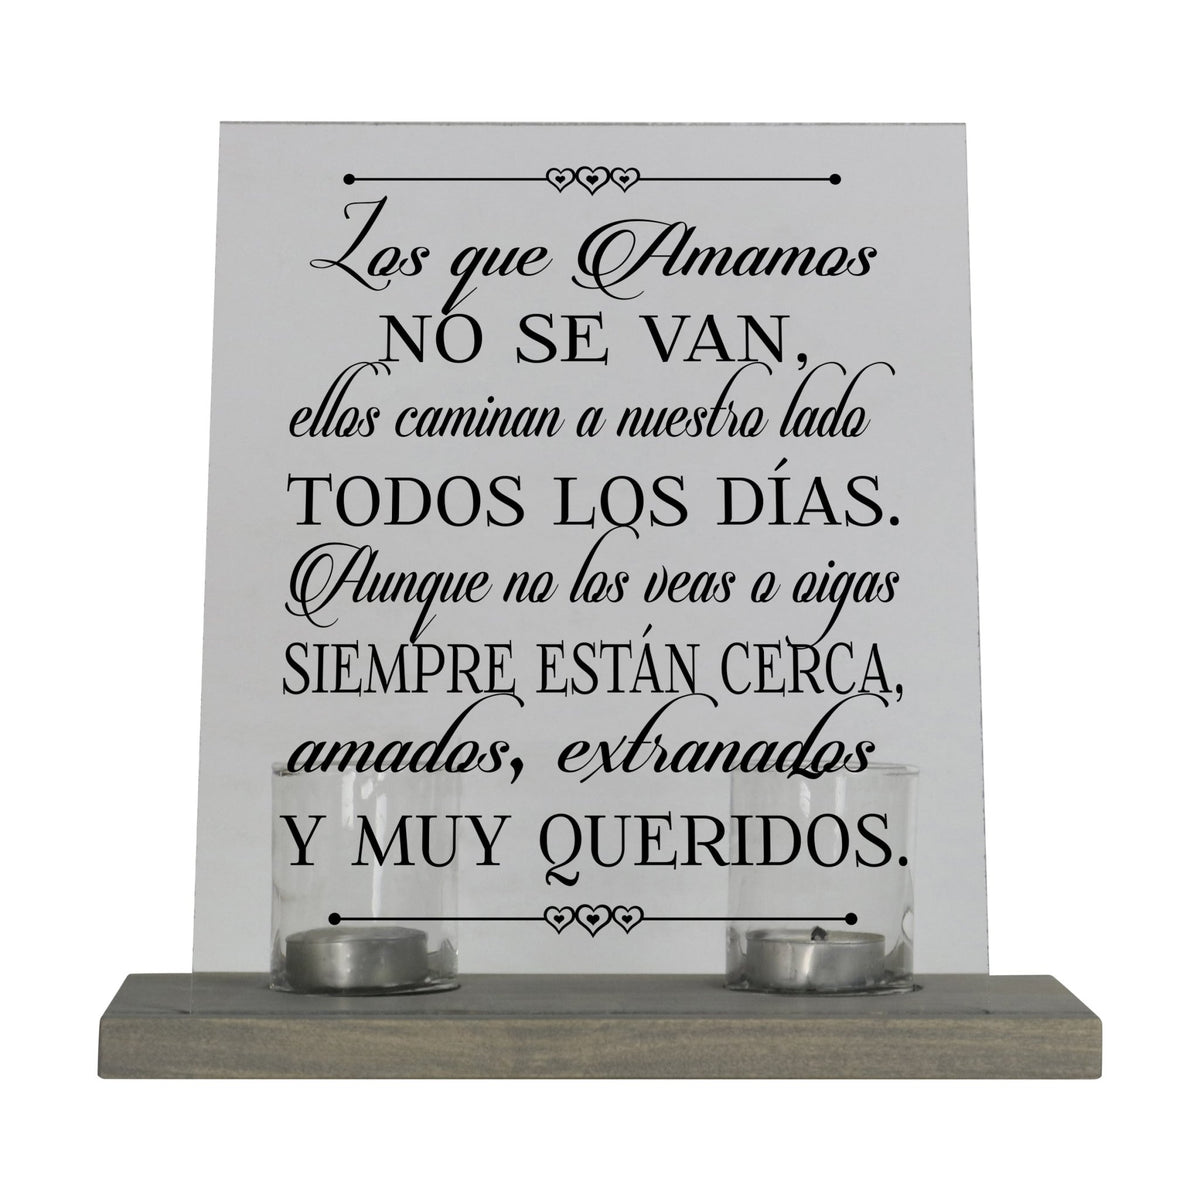 Memorial Acrylic Candle Holder Sign Those Who We Love Spanish Verse - LifeSong Milestones